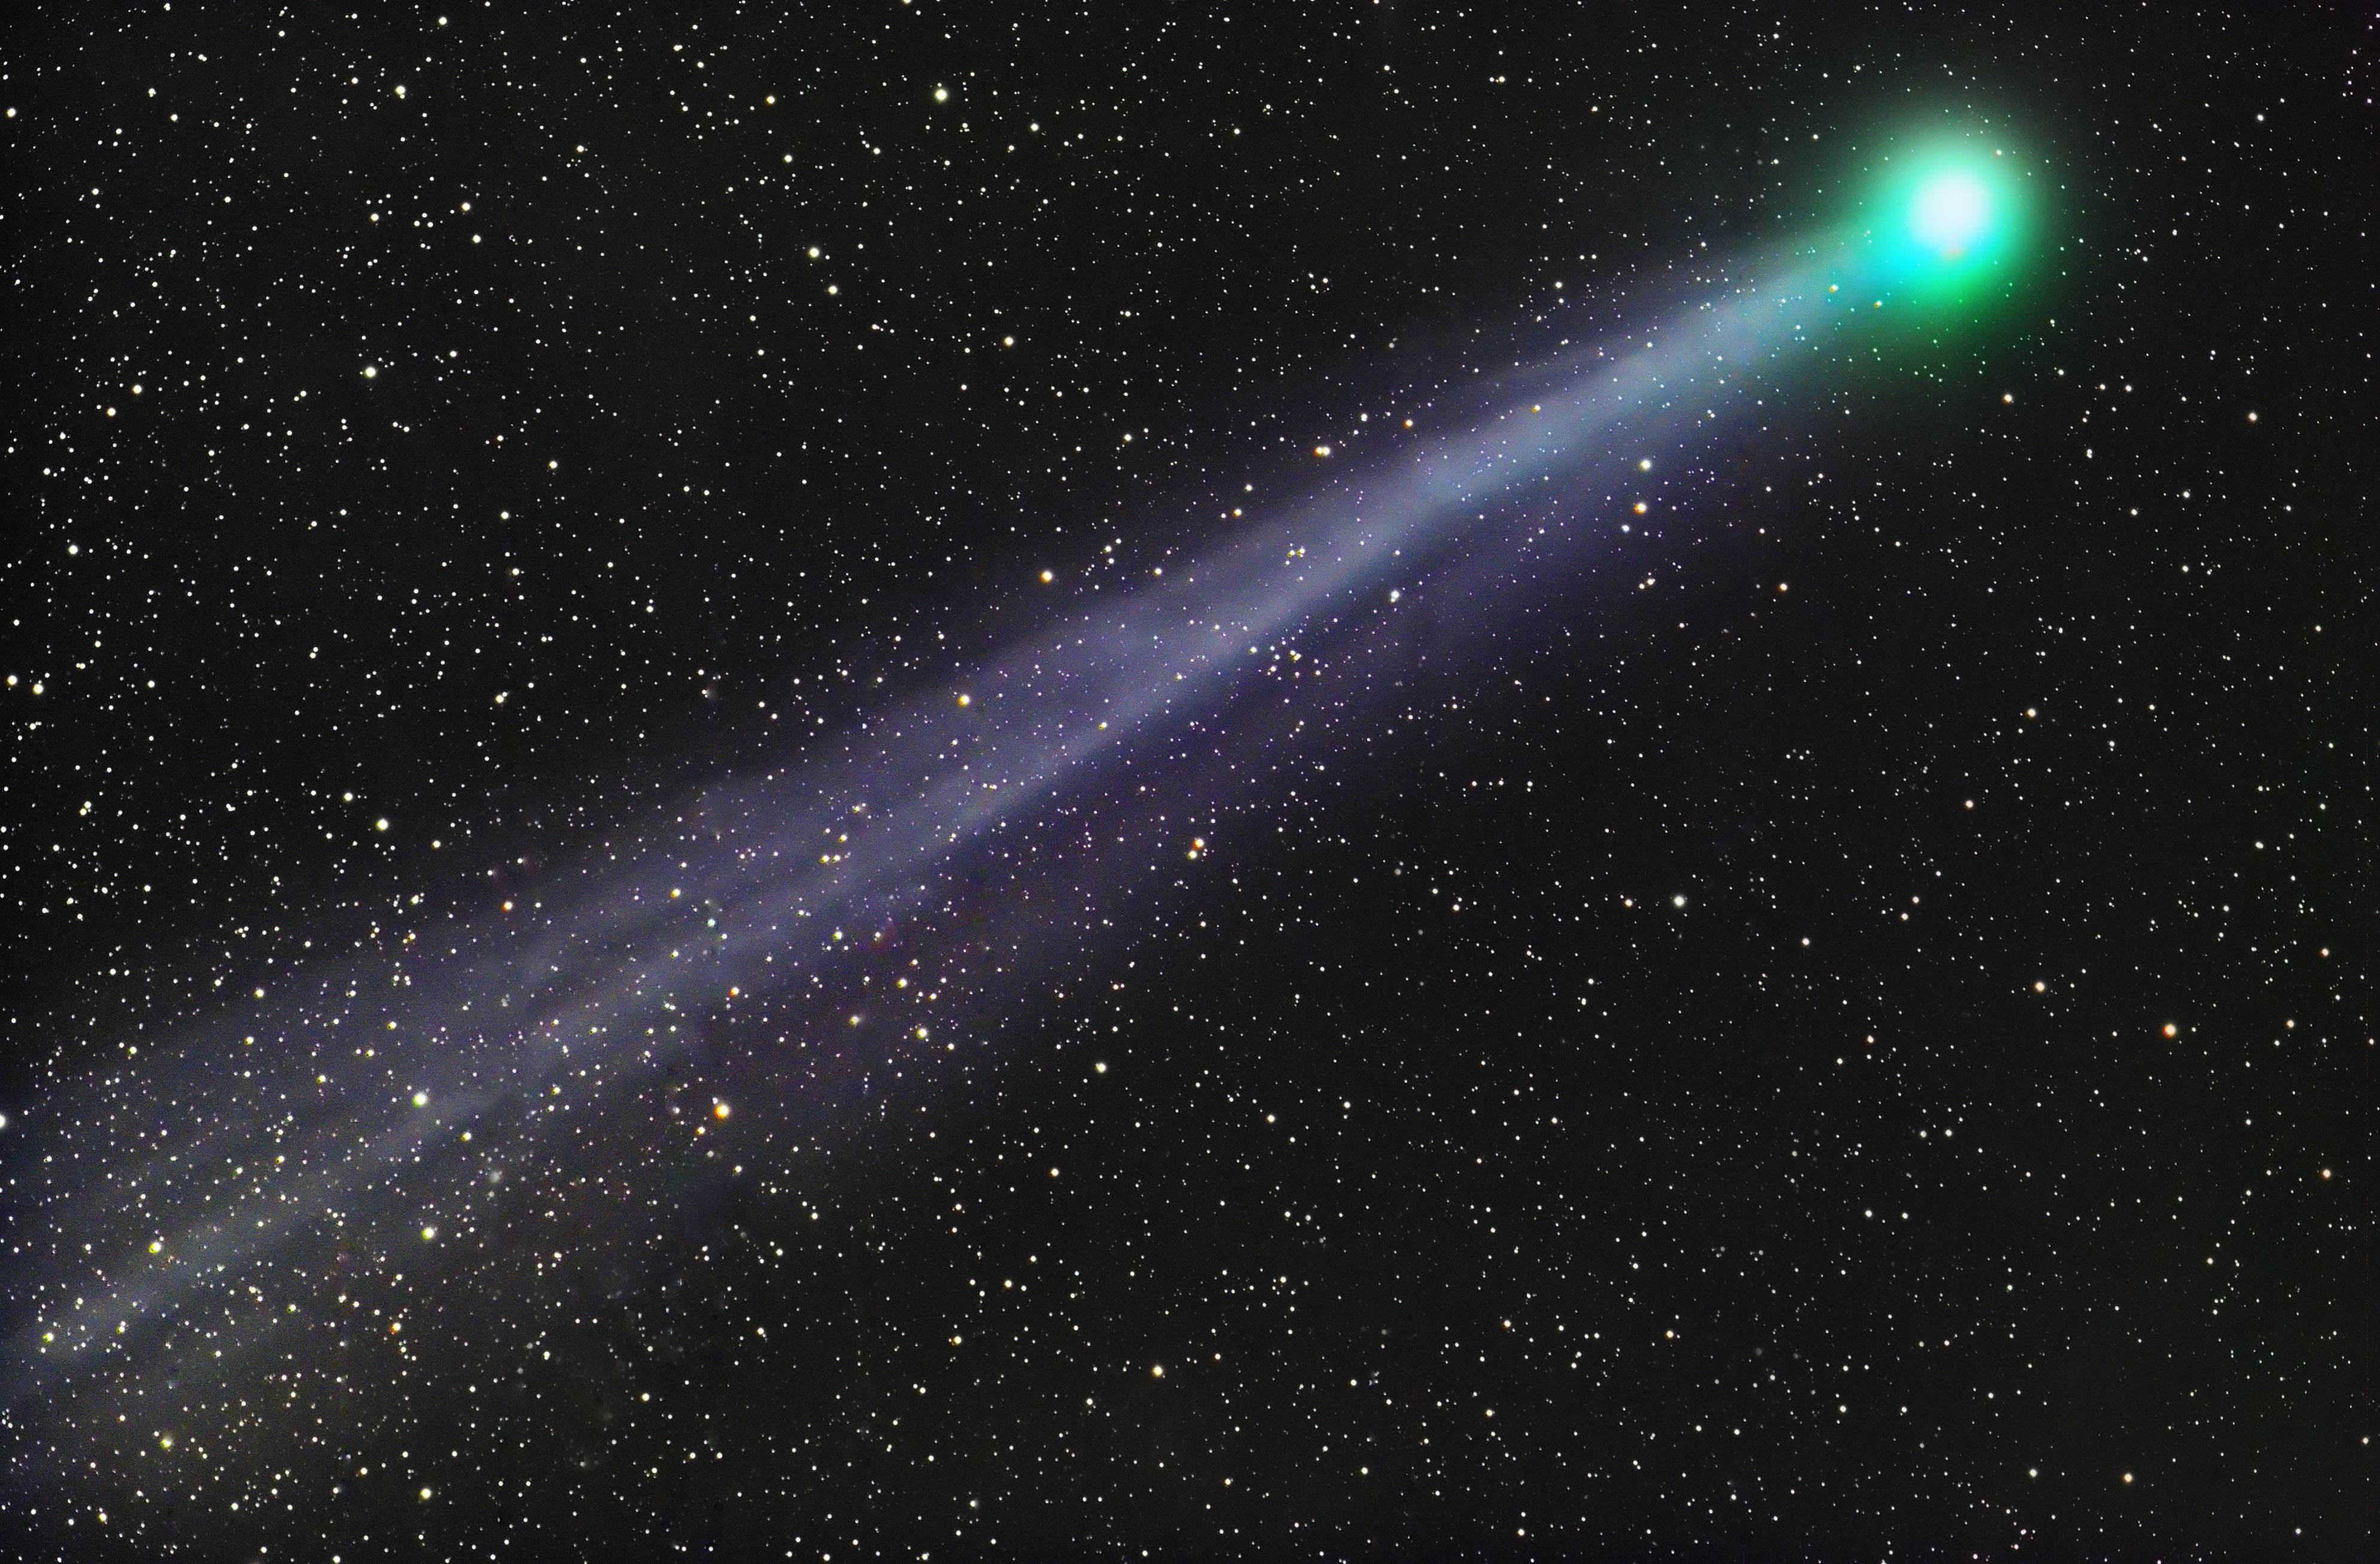 Science News Roundup: Explainer-What to expect during the green comet's encounter with Earth; From ashes to fly larvae, new ideas aim to revive farm soil